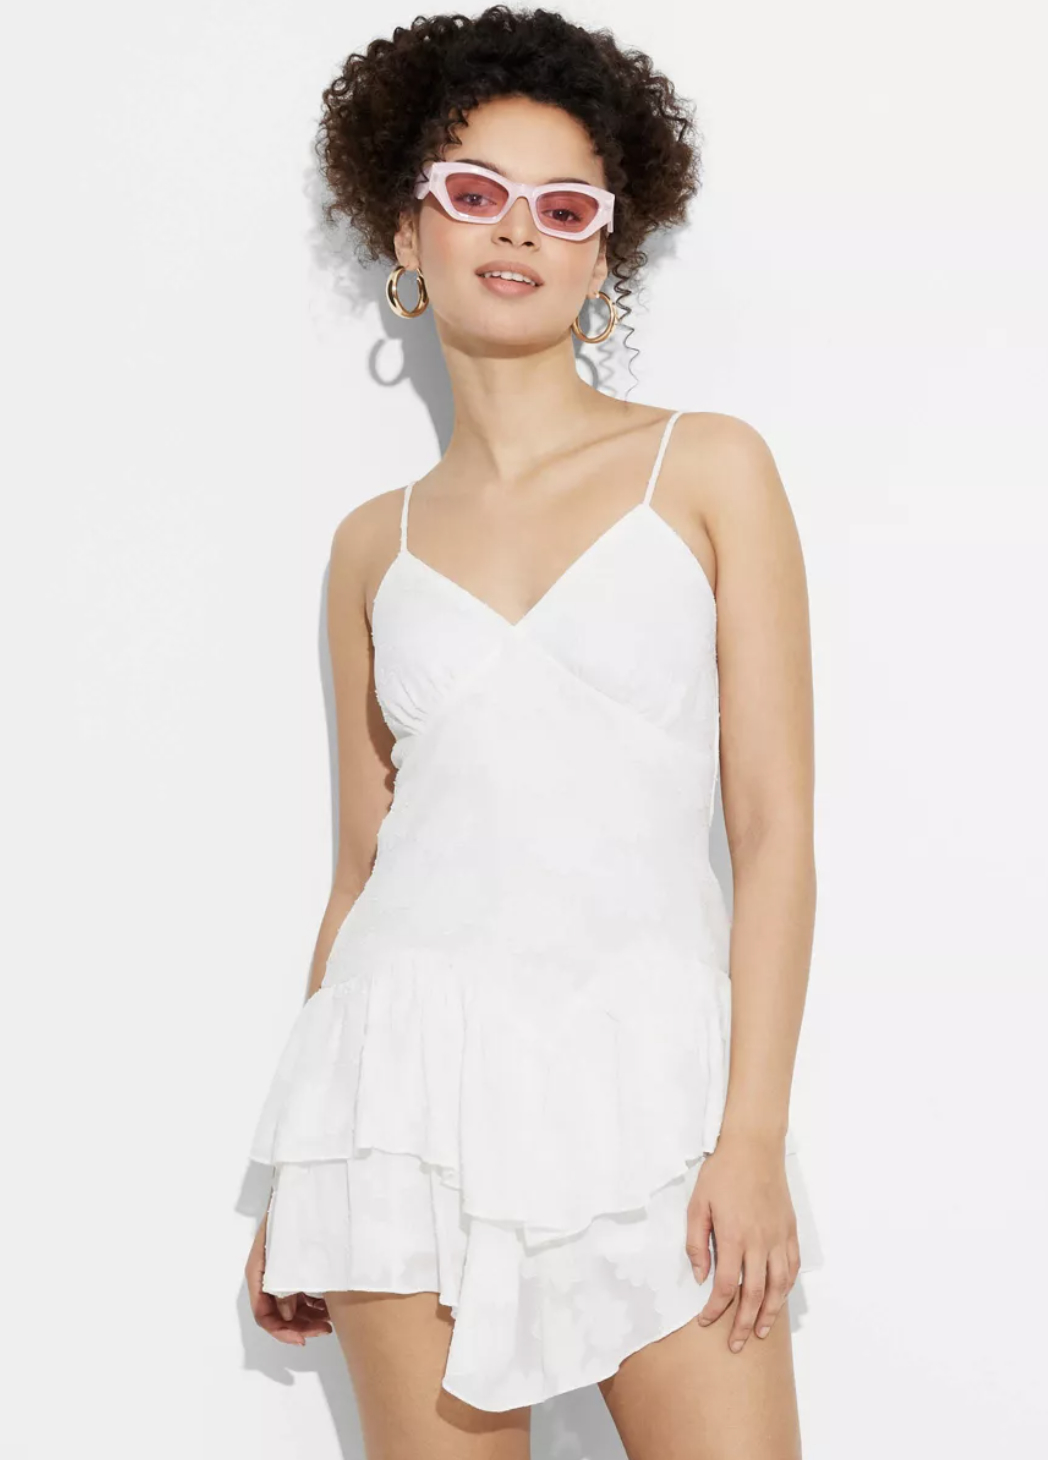 person in a white ruffled dress with sunglasses and hoop earrings